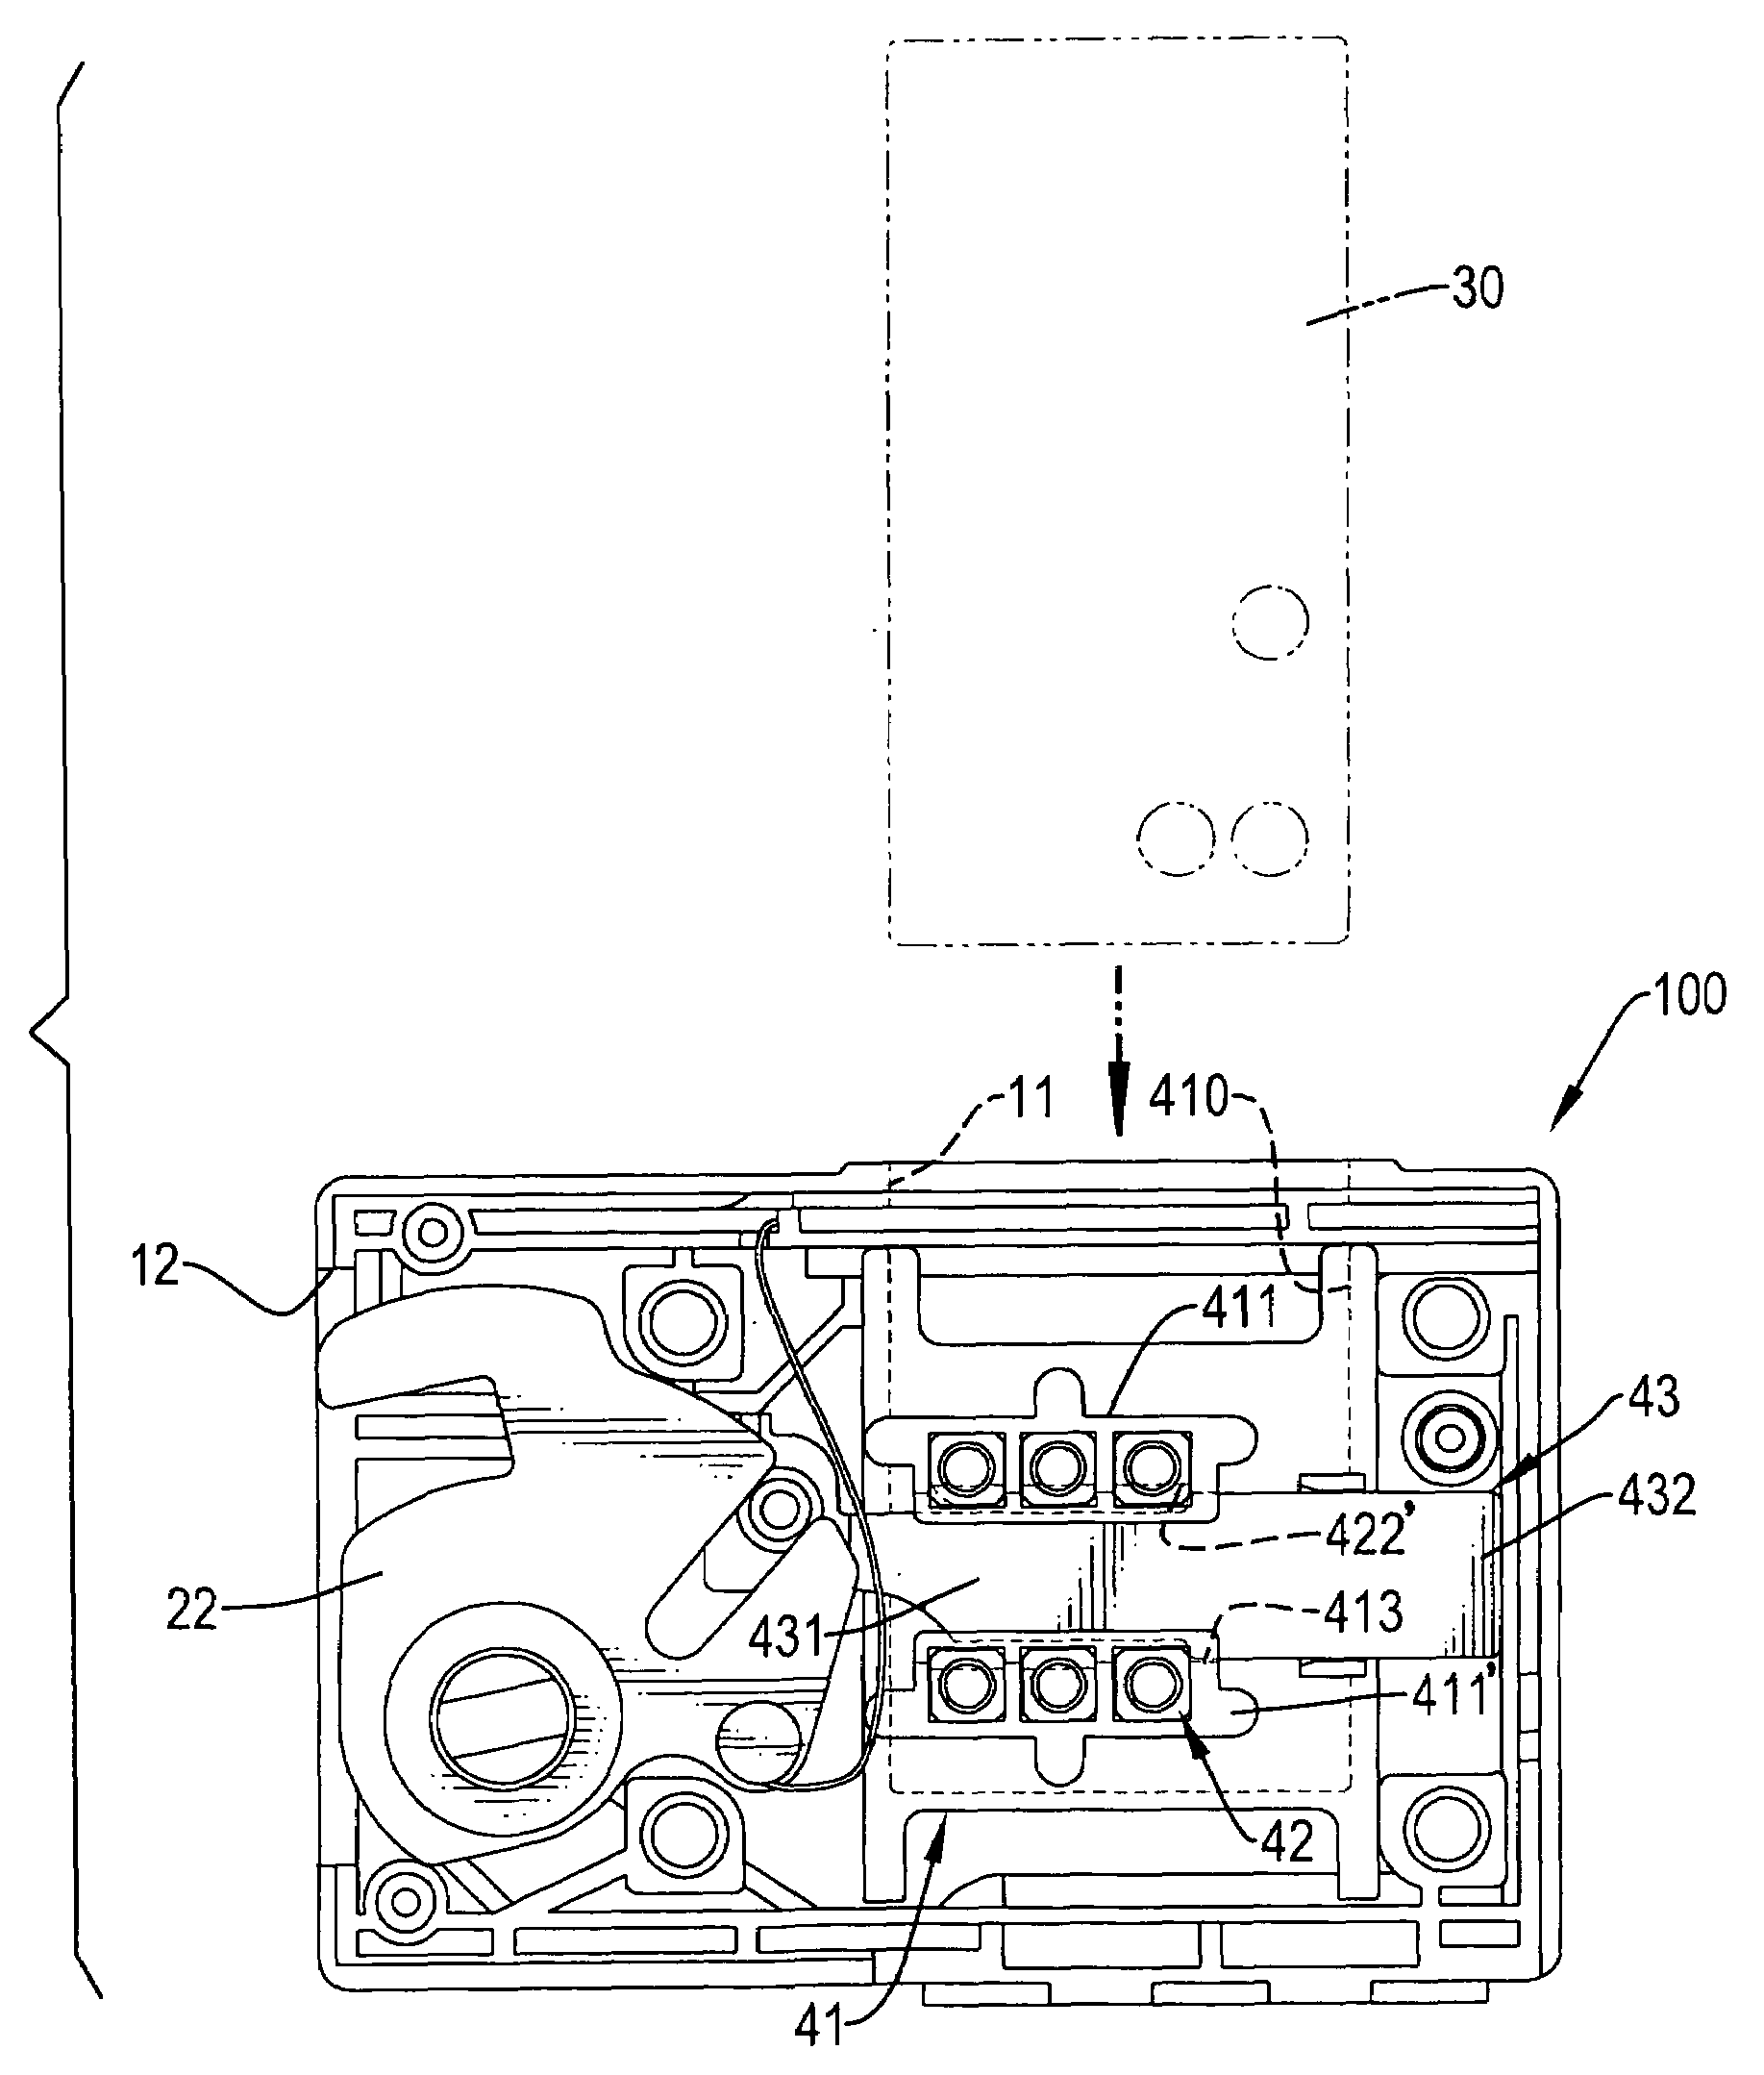 Locking device for a storage cabinet